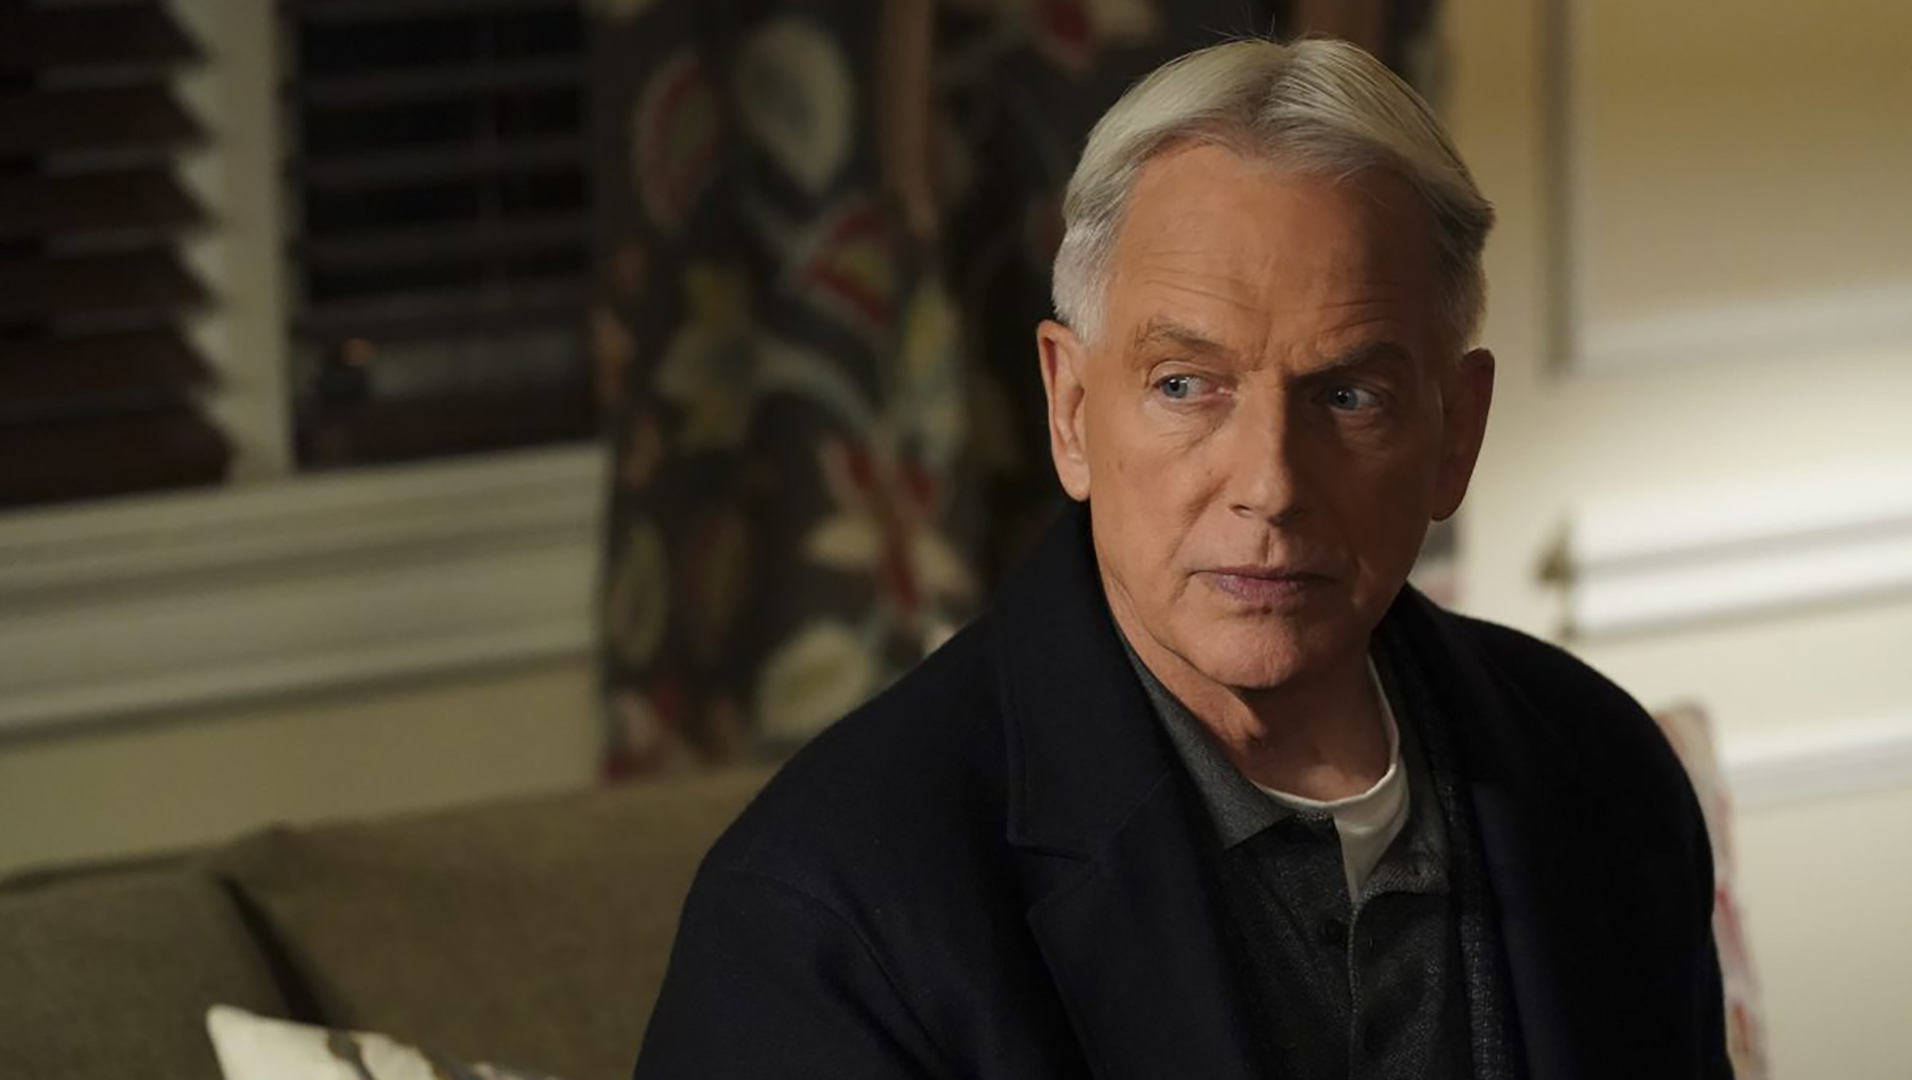 NCIS wouldn’t be the same without Gibbs